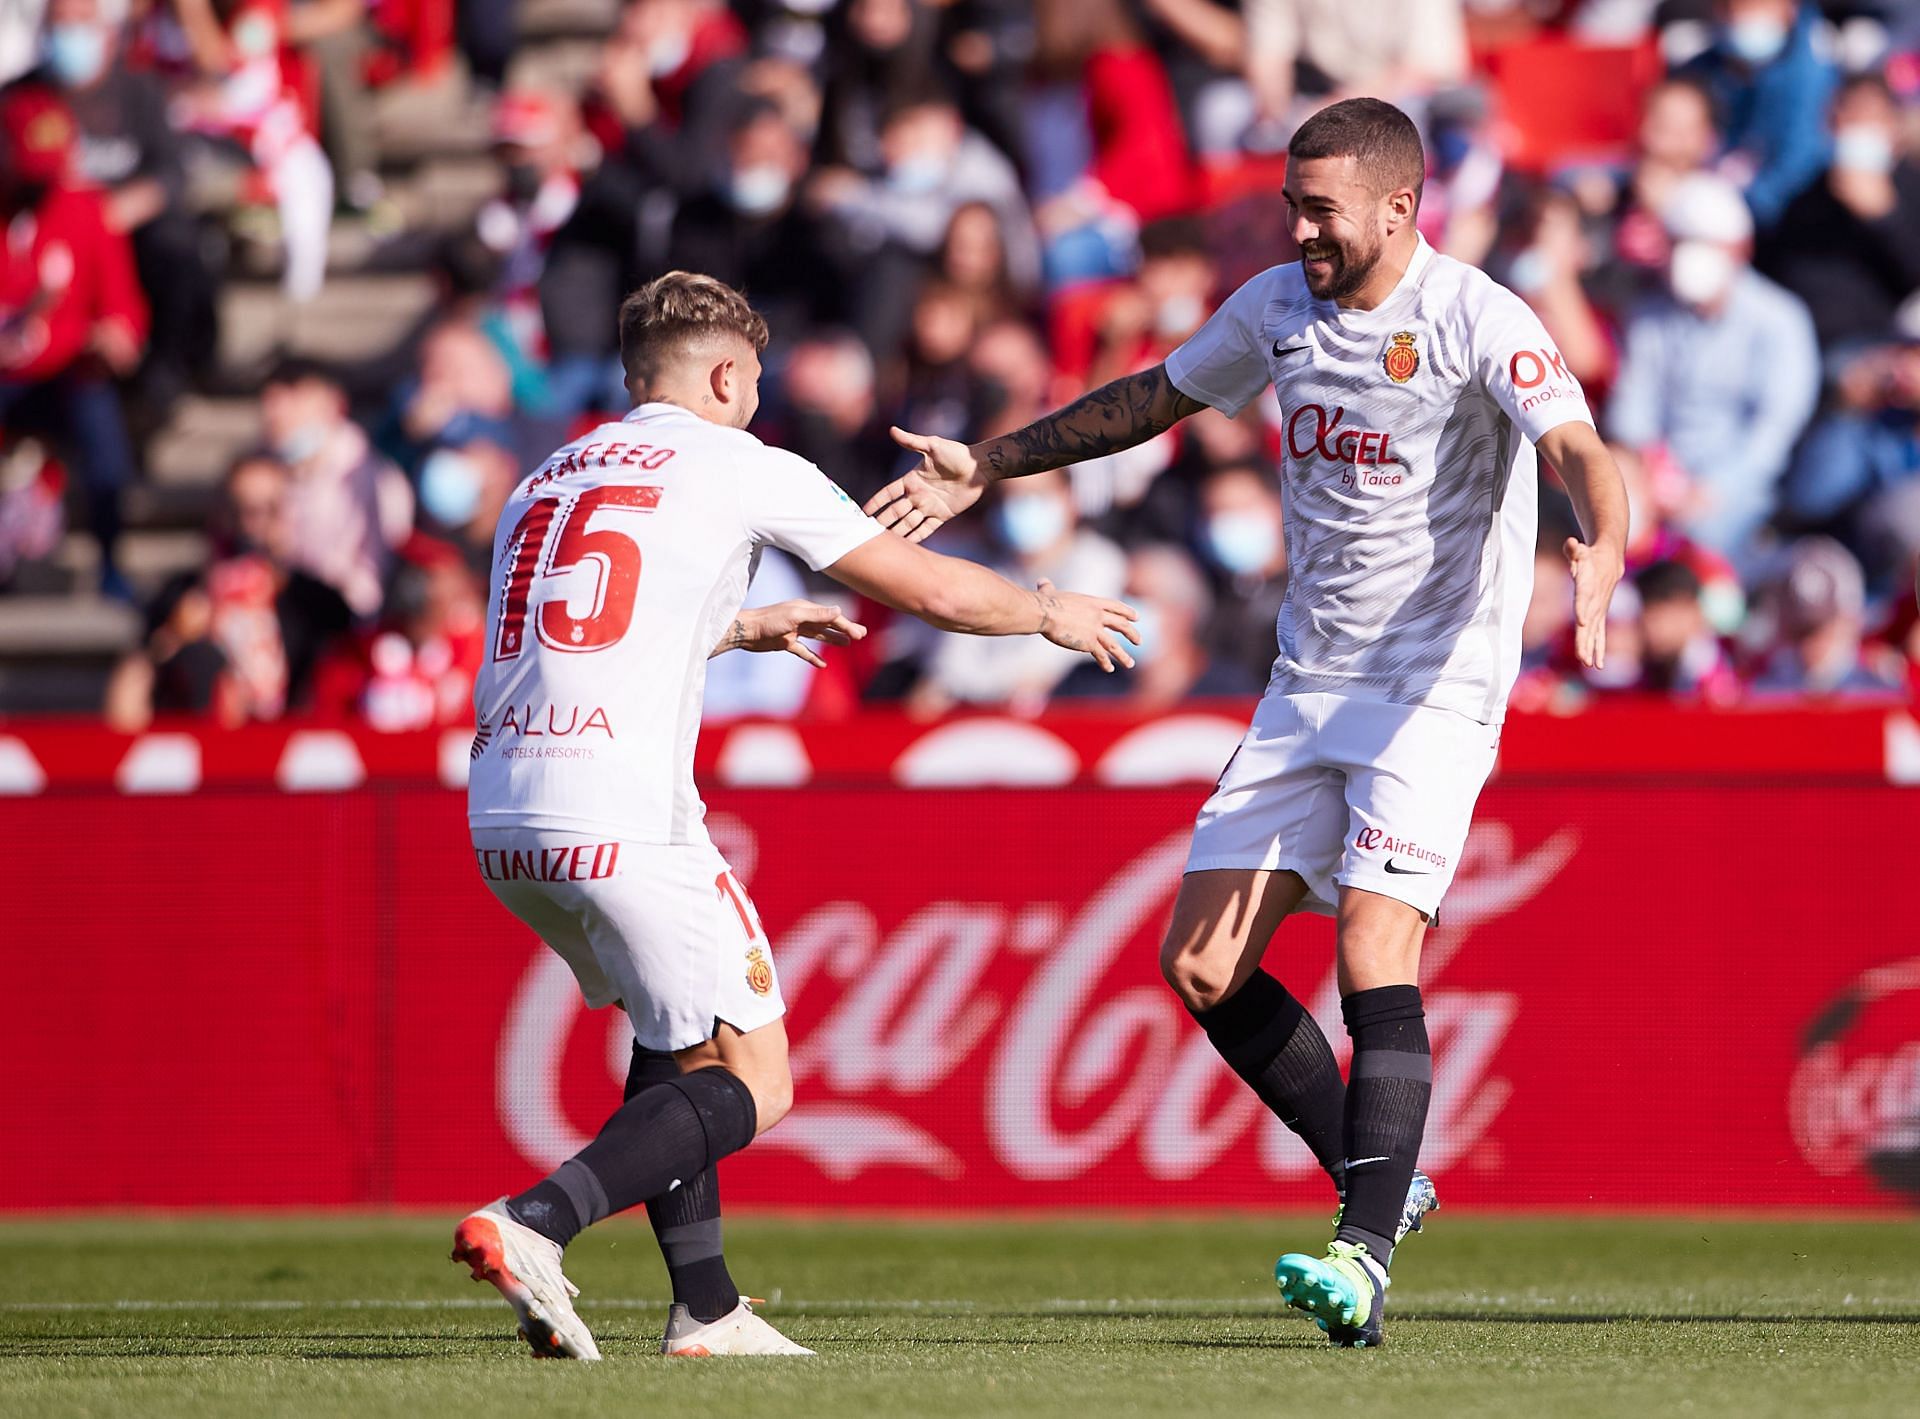 Mallorca are looking to climb up the table with a win